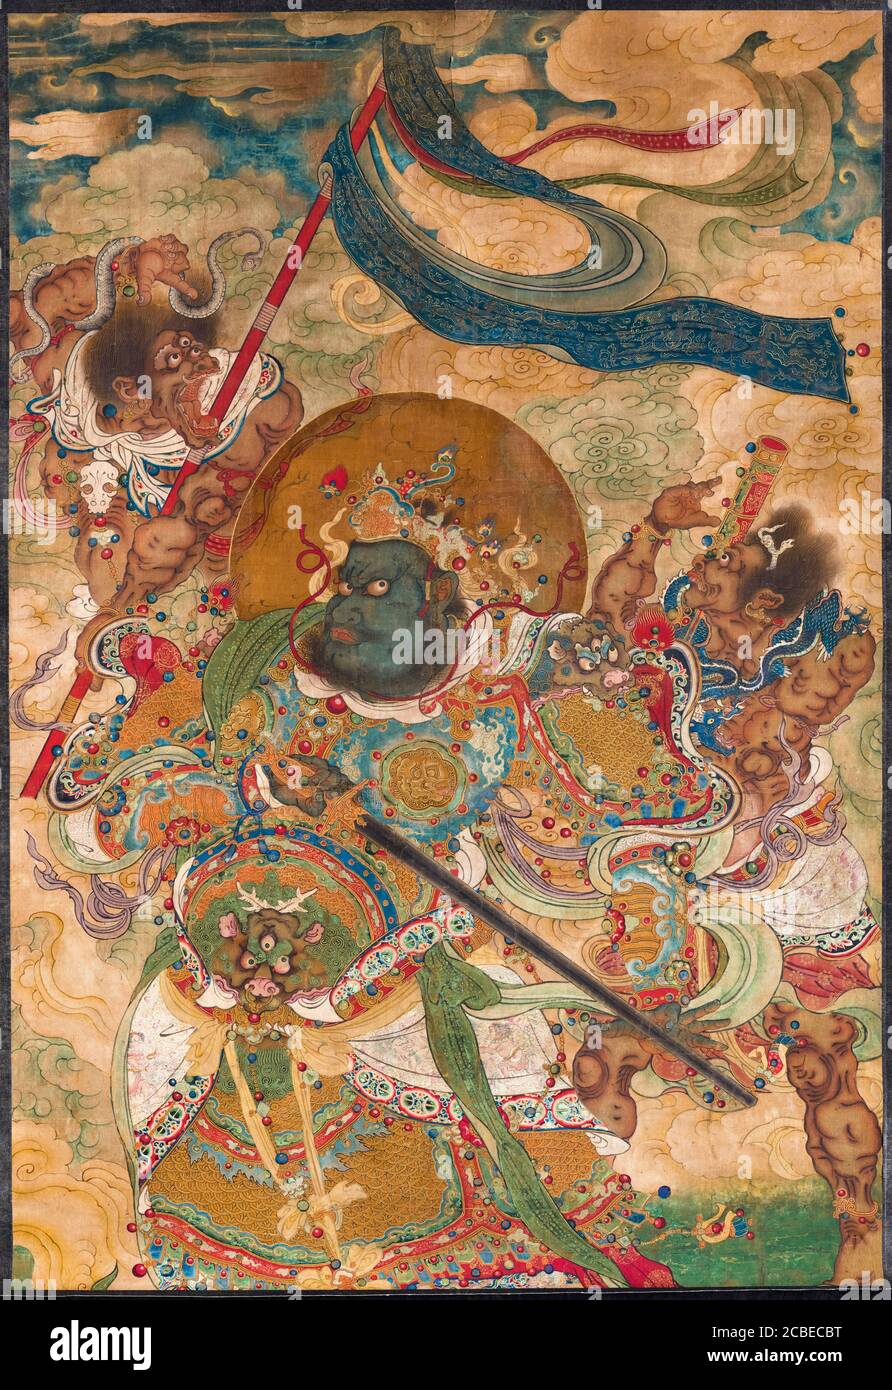 Heavenly King Virudhaka, Guardiano del Sud, Ming Dynasty Chinese impiccato scroll 1368-1644 Foto Stock